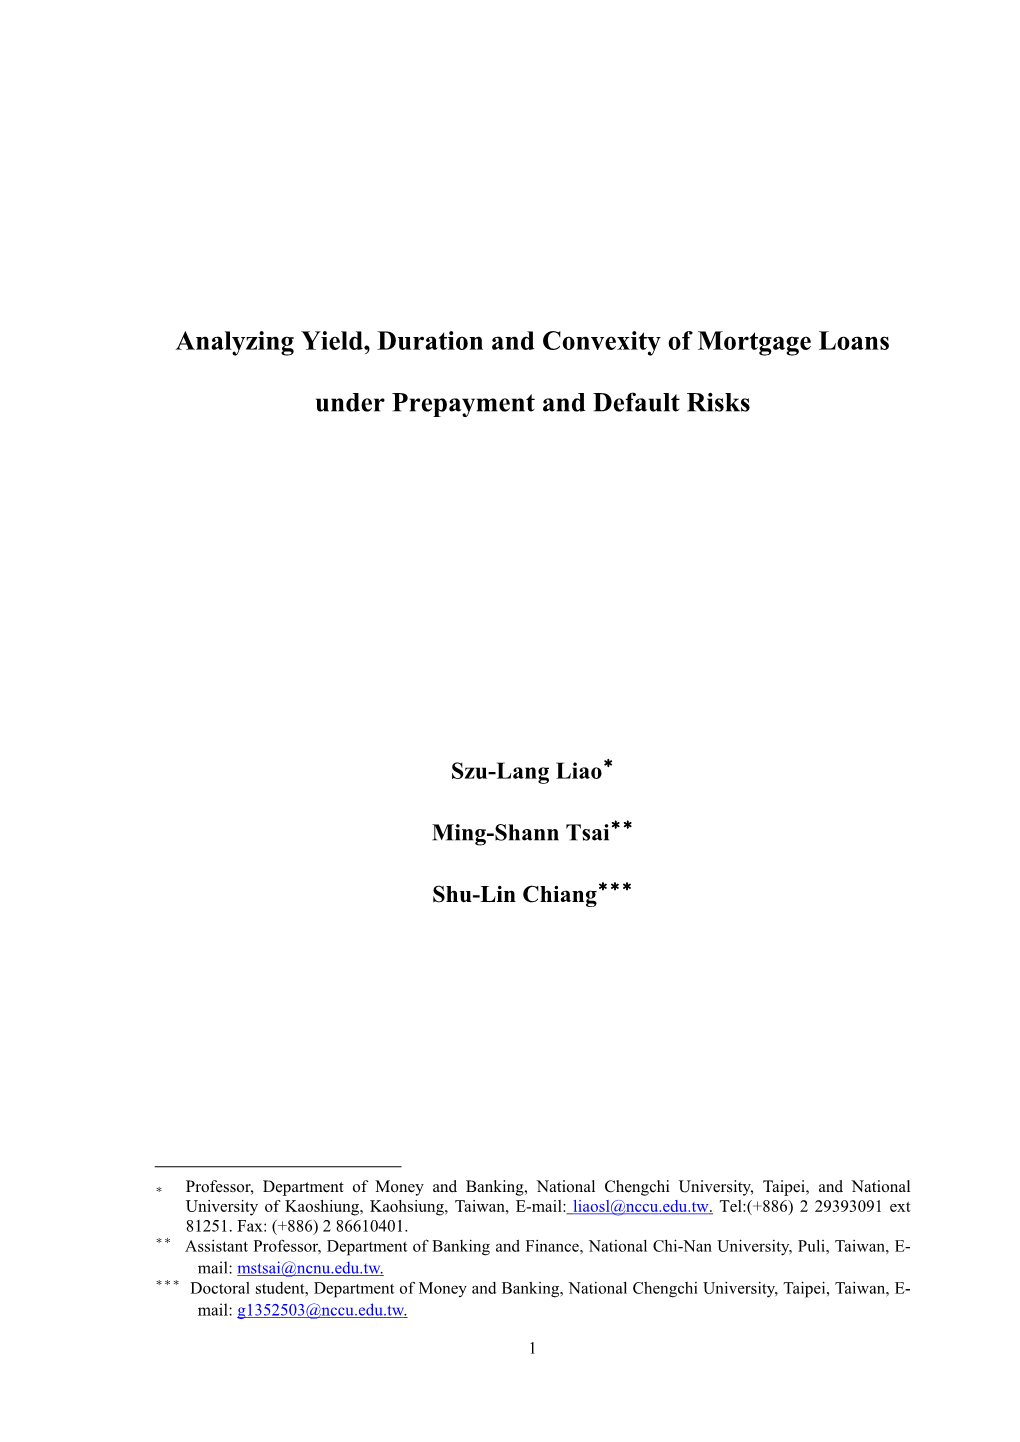 Analyzing Yield, Duration and Convexity of Mortgage Loans Under